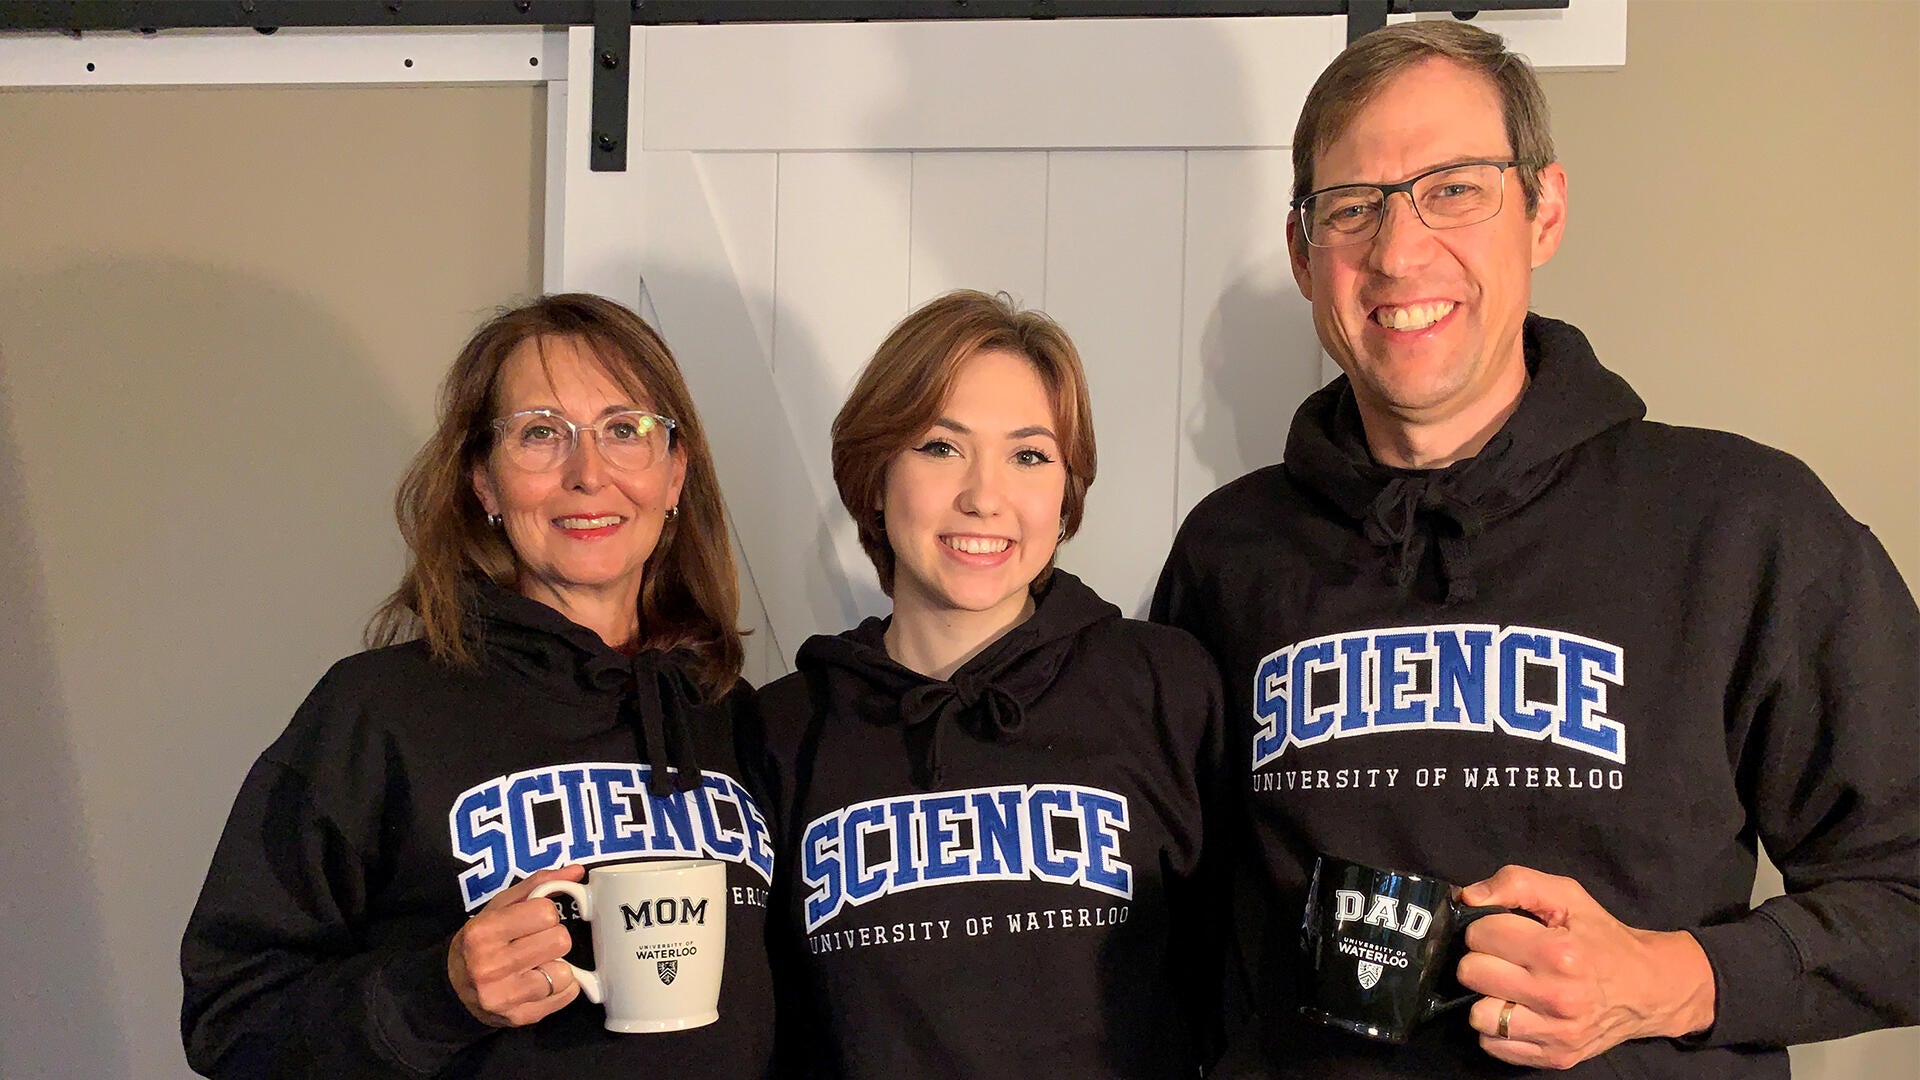 Jocelyn Hadden with her parents Susan and James, all in Waterloo Science sweaters.